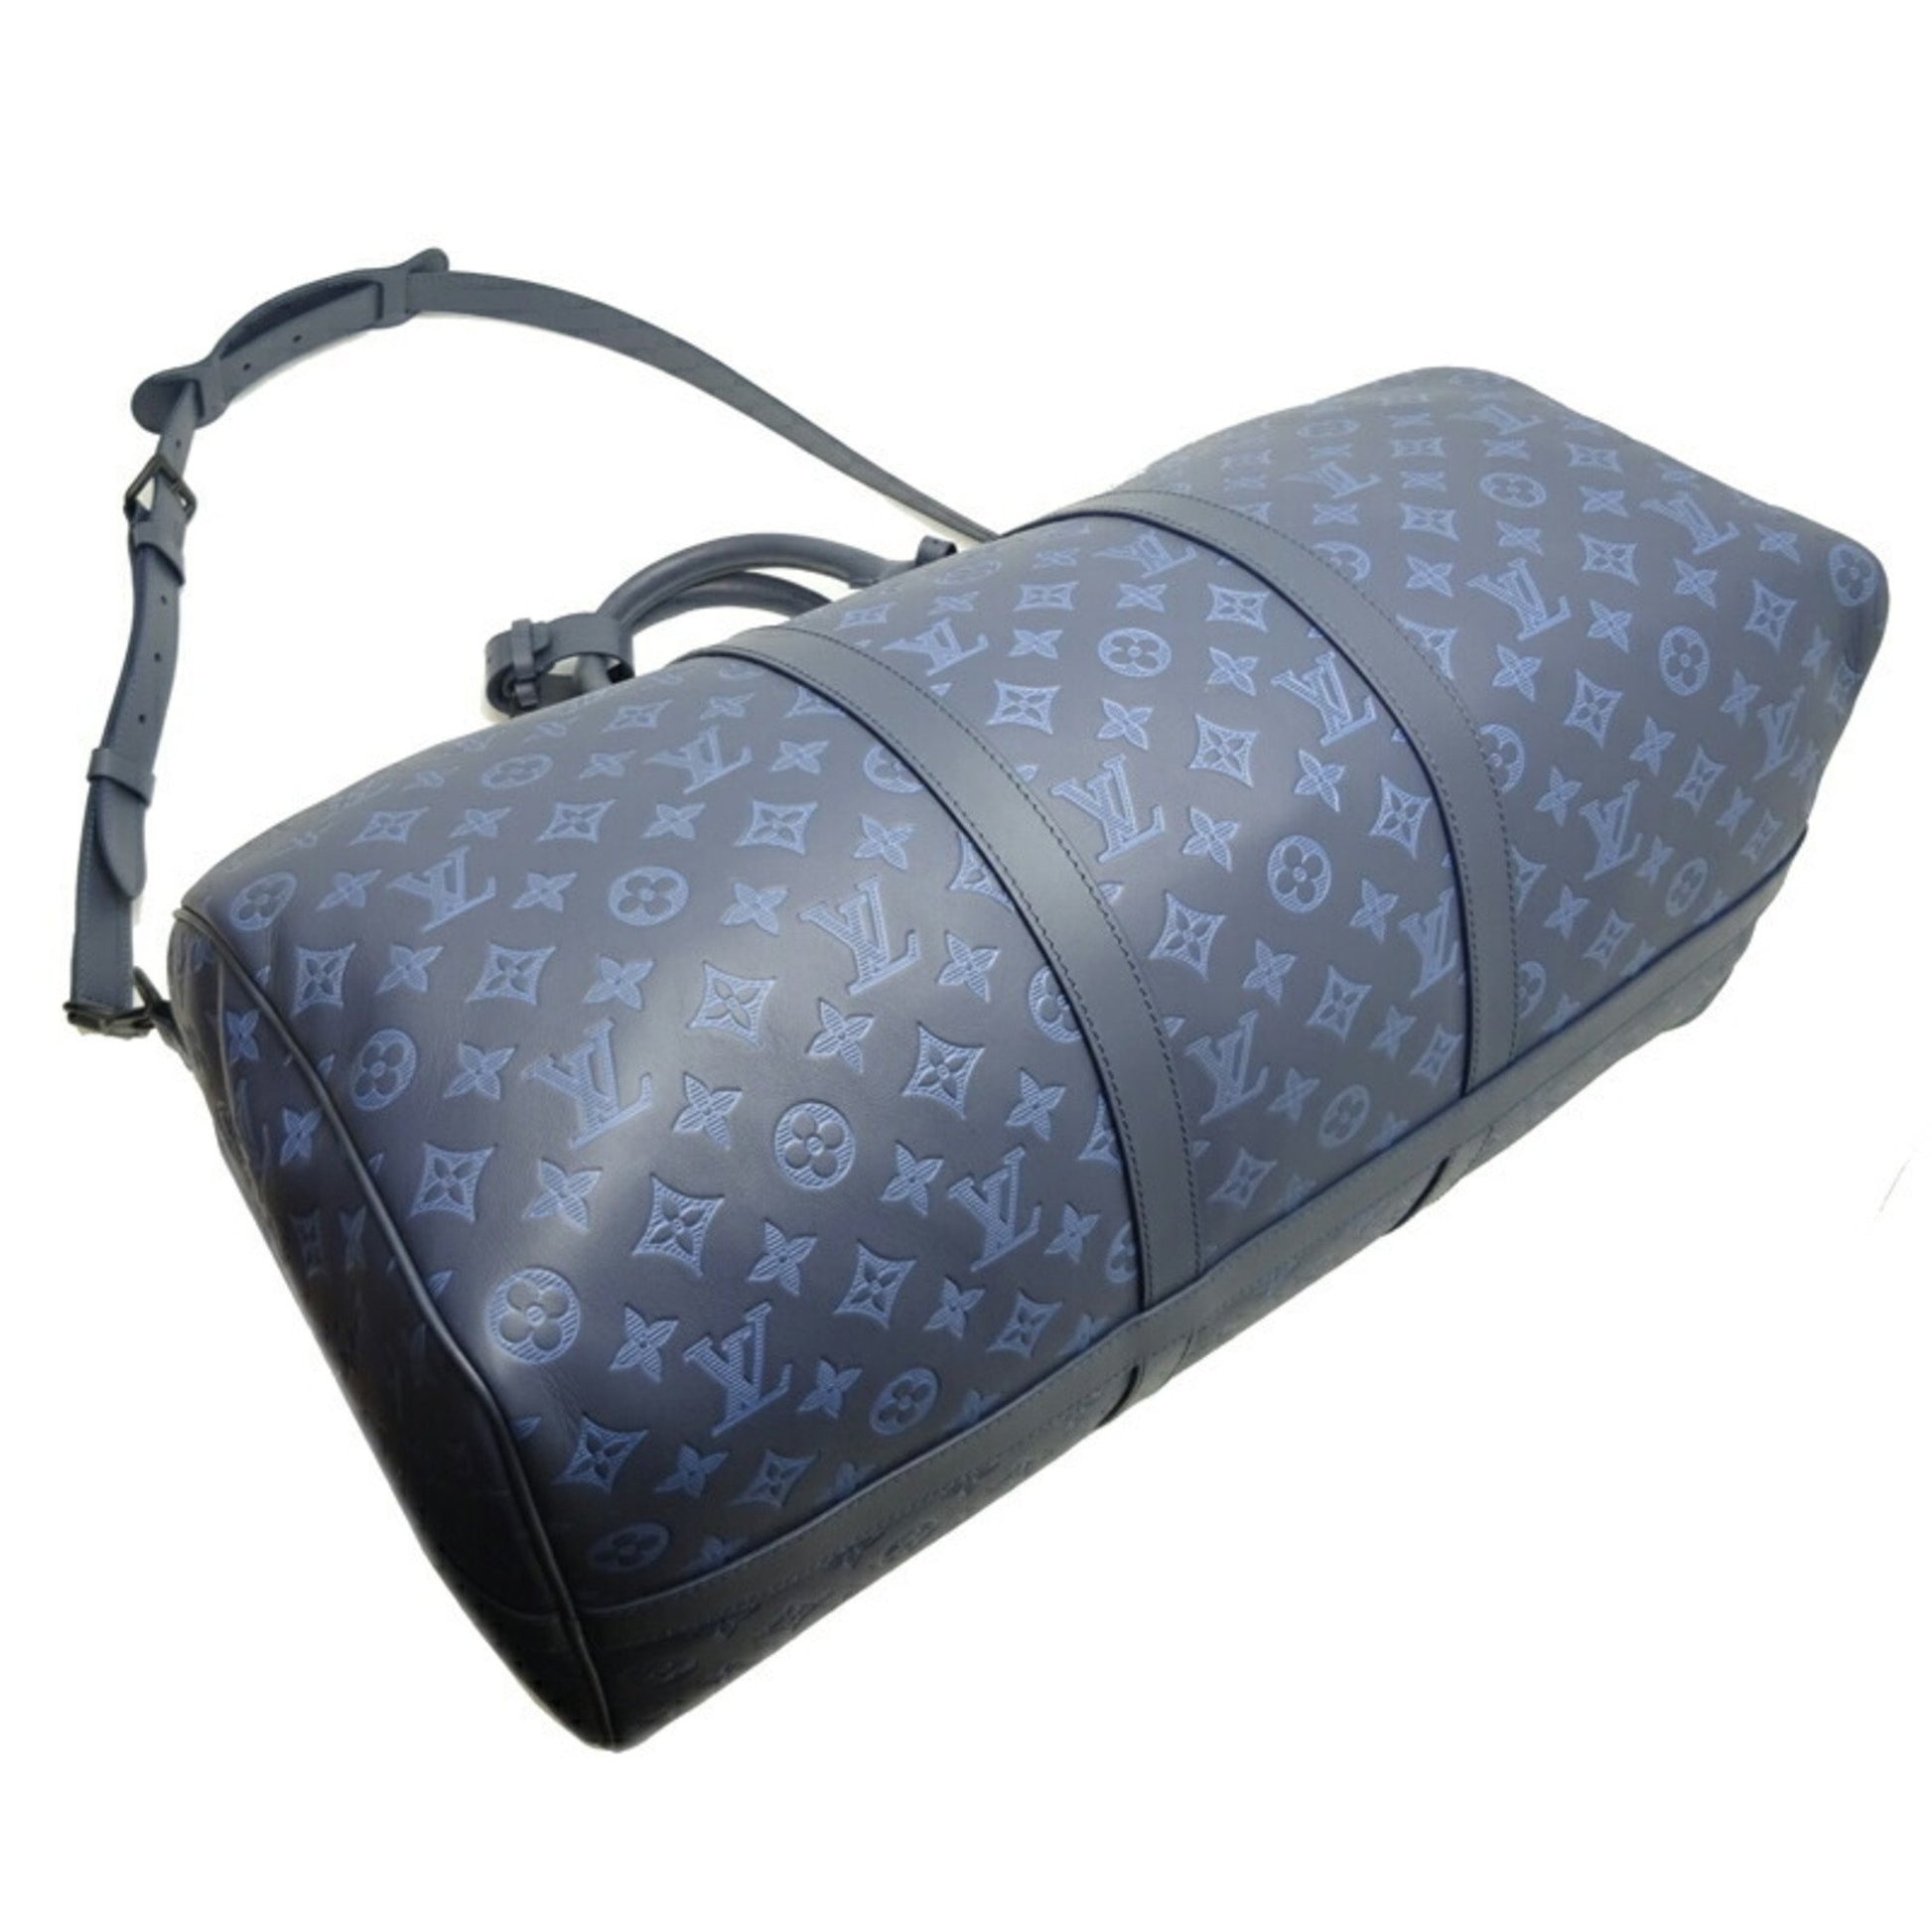 Louis Vuitton Monogram Canvas and Leather Keepall Bandouliere 55 bag - My  Luxury Bargain South Africa